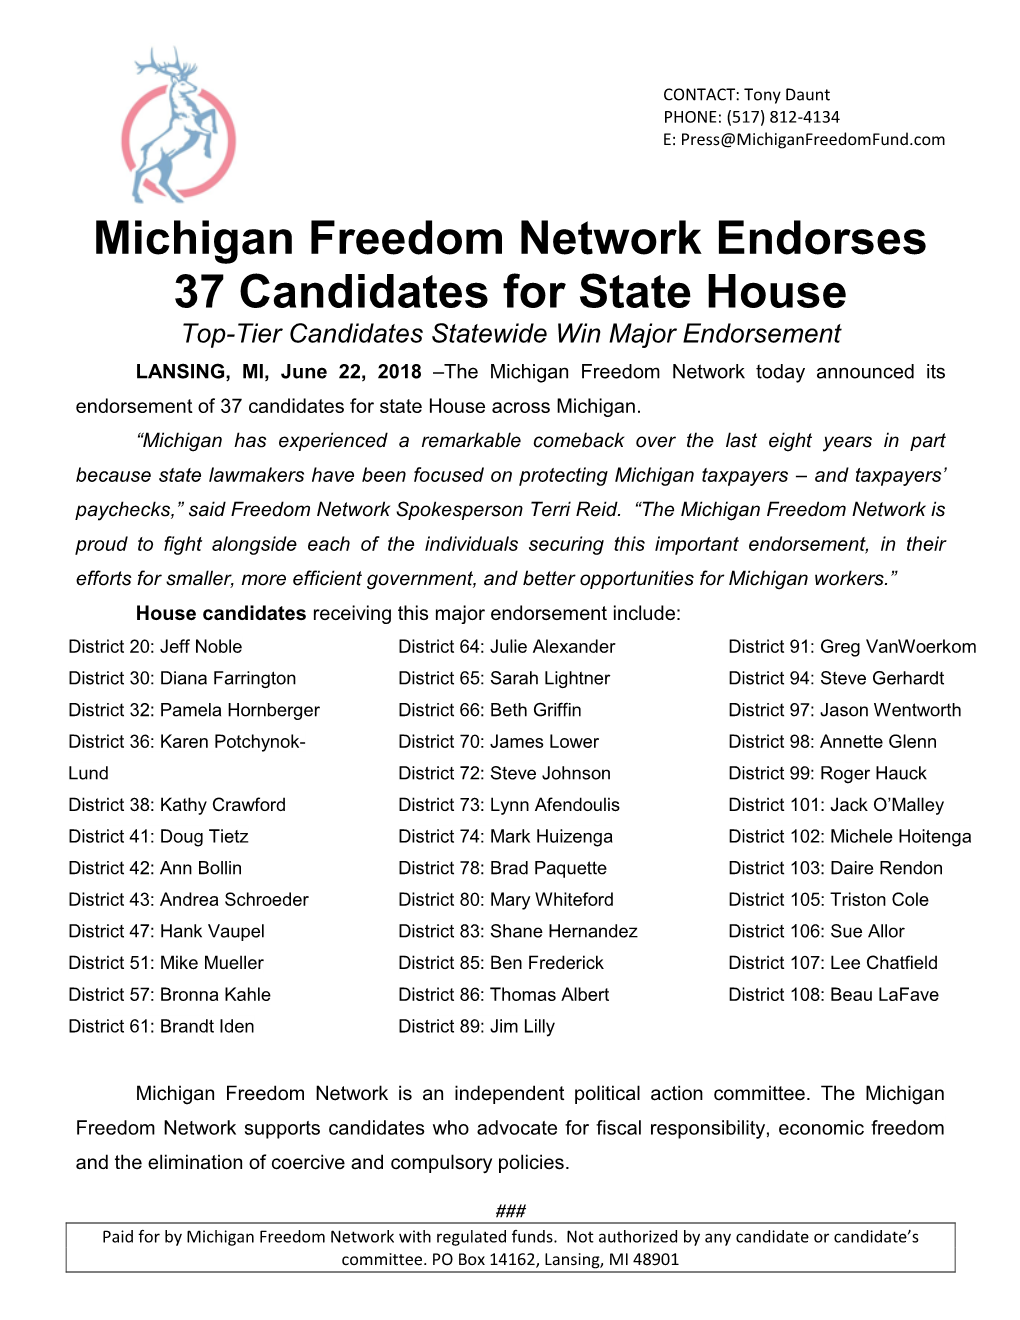 Michigan Freedom Network Endorses 37 Candidates for State House Top-Tier Candidates Statewide Win Major Endorsement